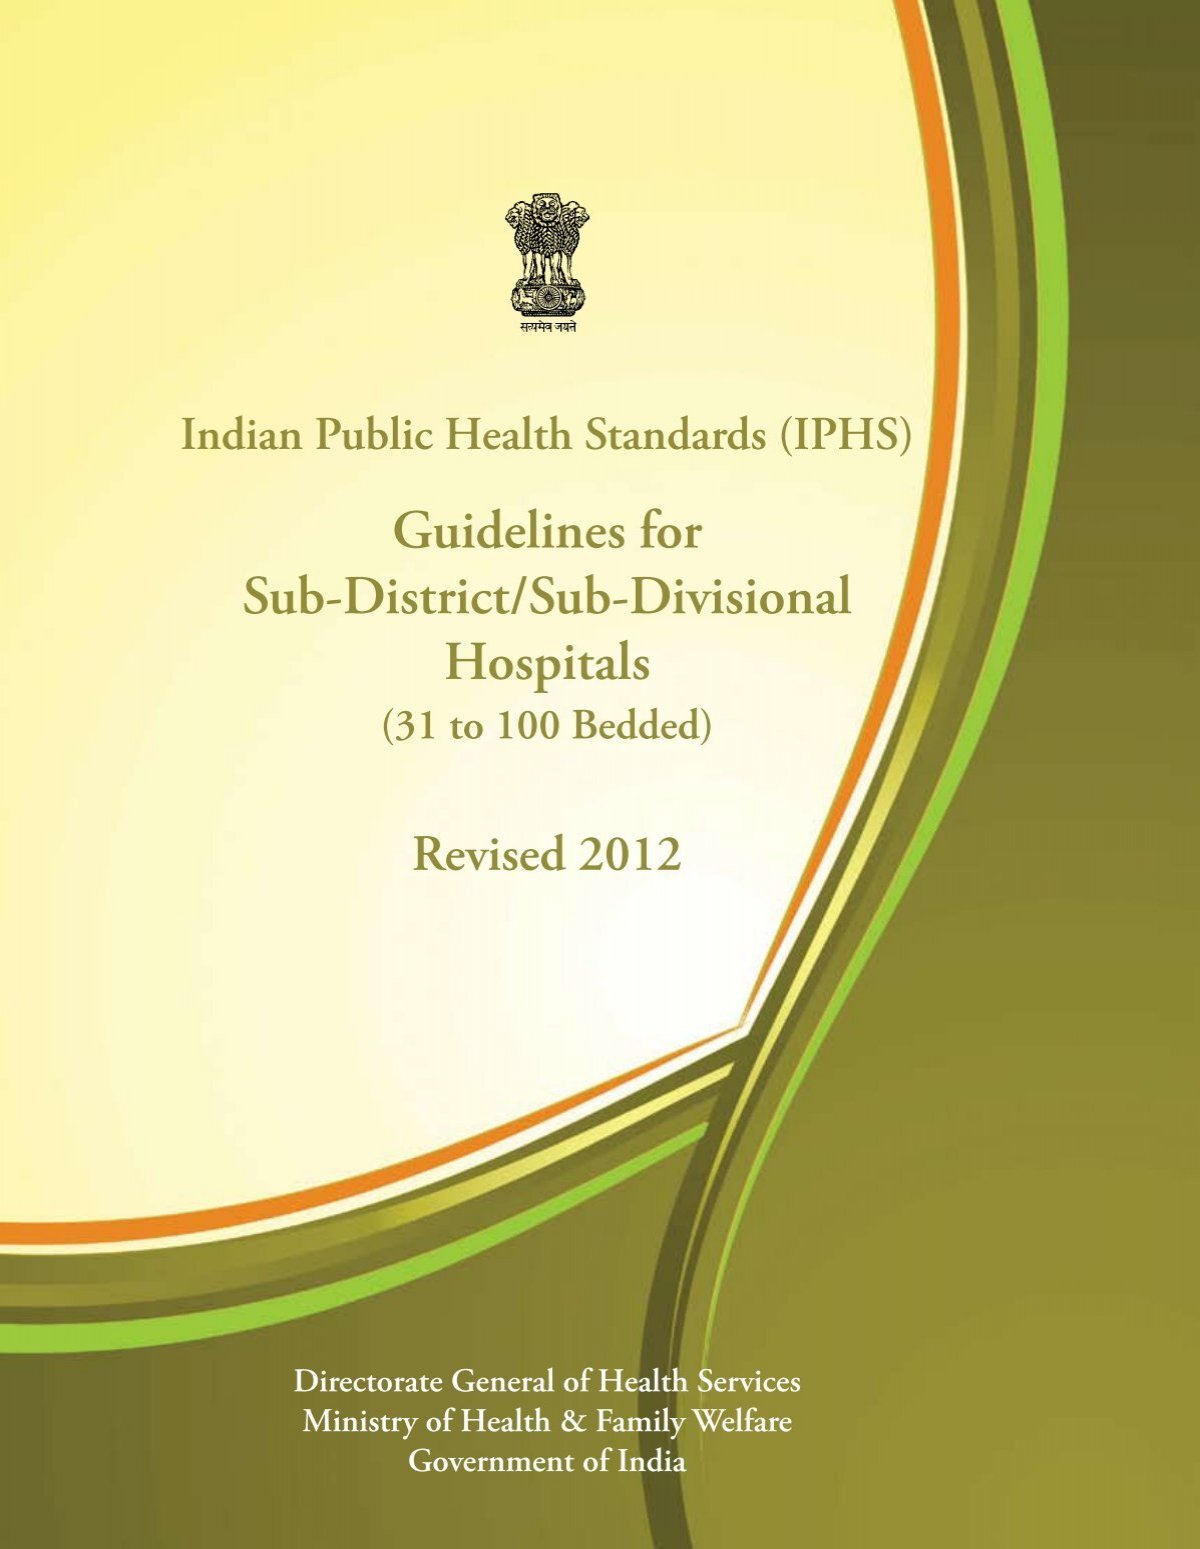 IPHS Guidelines for Sub-District/Sub-Divisional Hospitals (Revised)